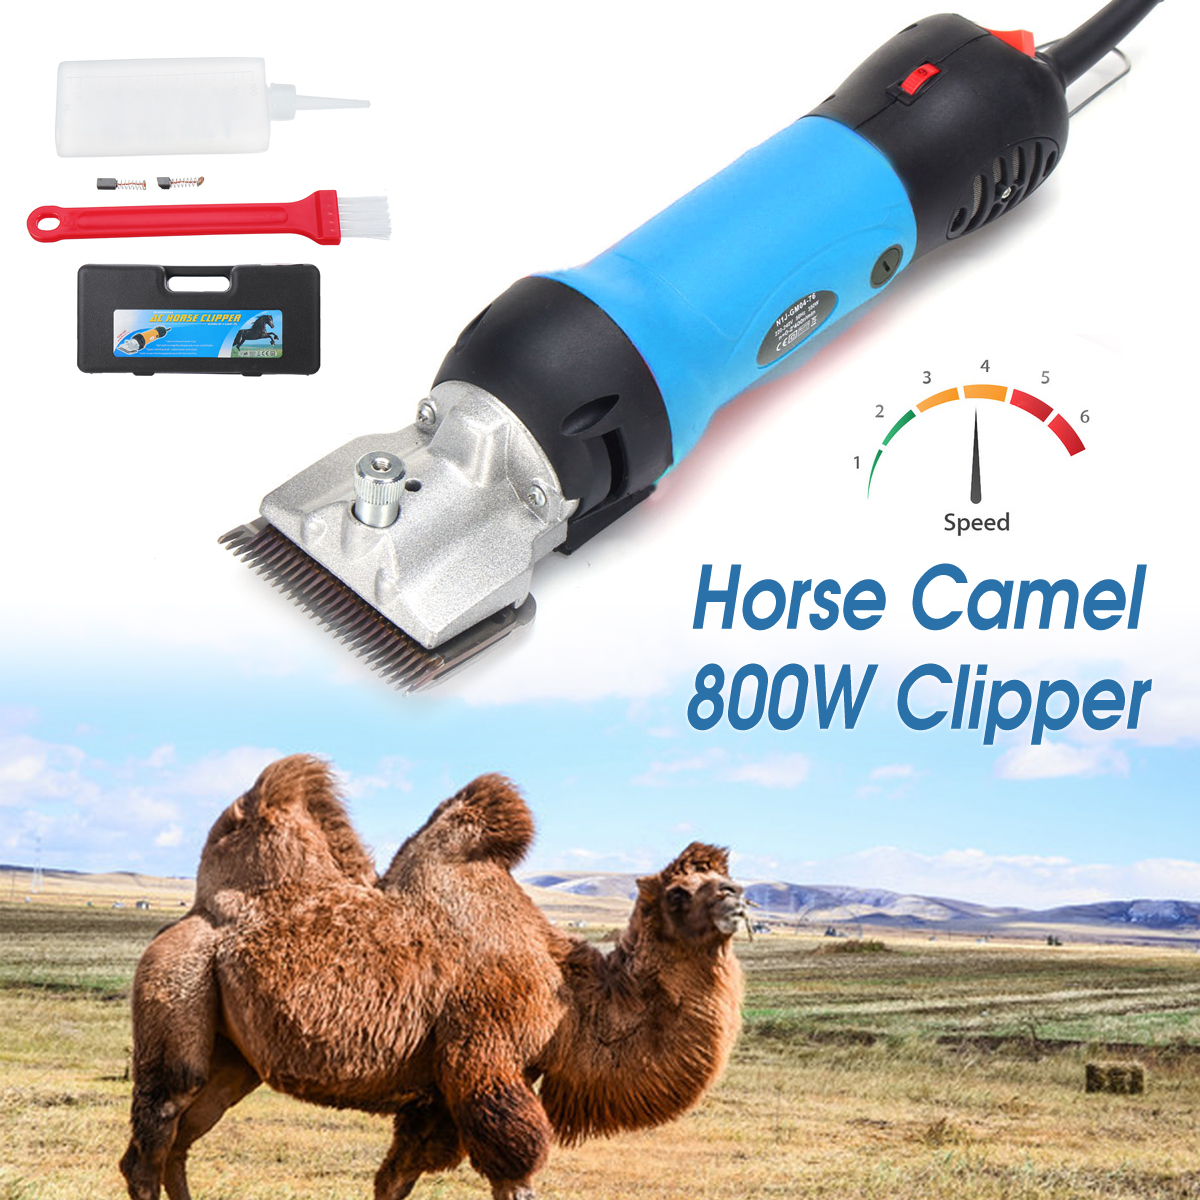 Heavy-Duty-Electric-Horse-Hair-Clipper-Multi-used-Farm-Shearing-Trimmer-Shaver-6-Speed-Regulated-She-1441907-1